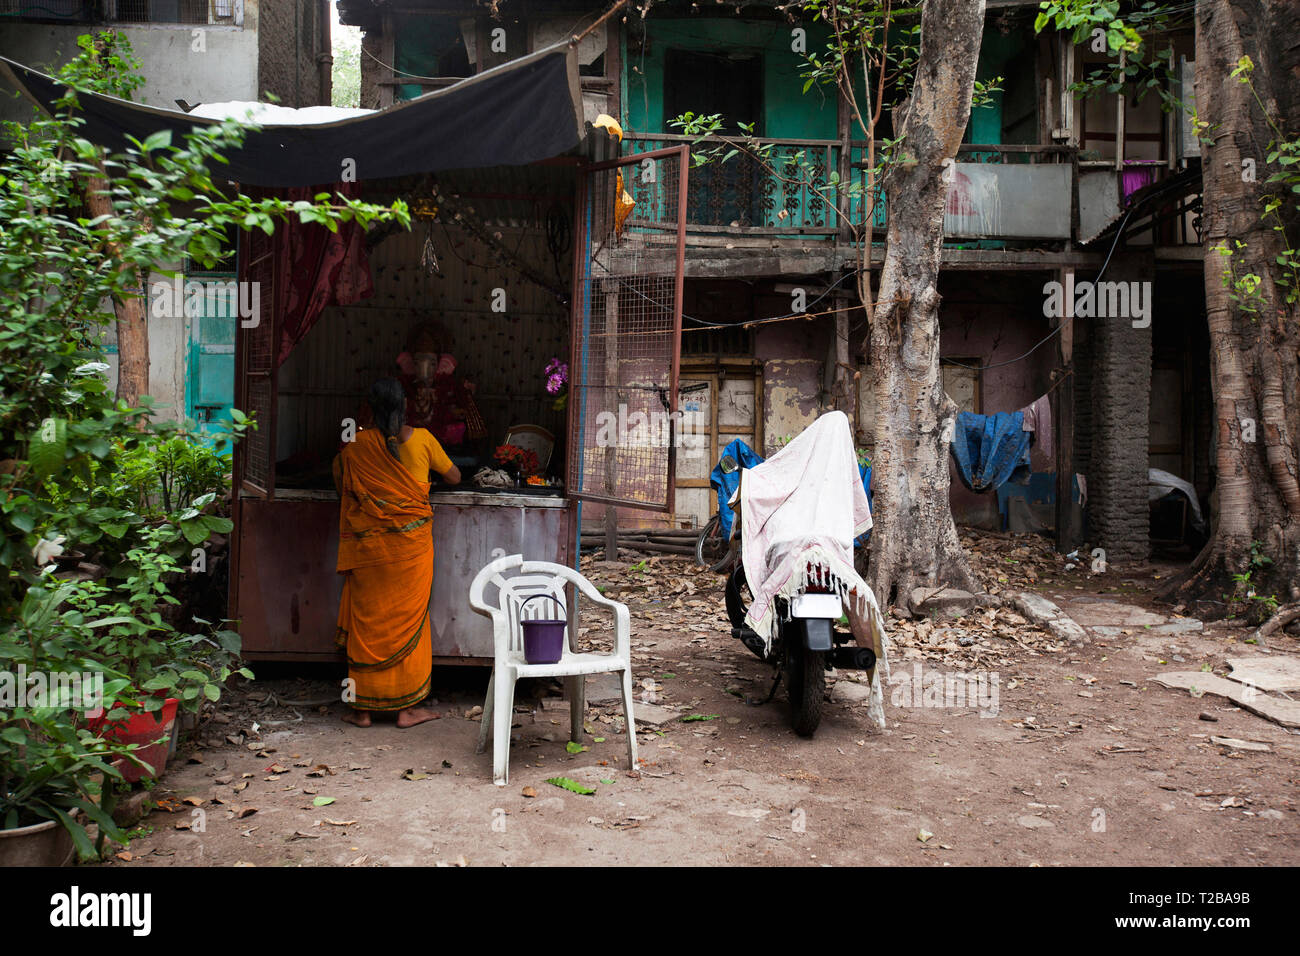 Woman praying to lord Ganesha near old building in Wadas of Pune, India. Stock Photo